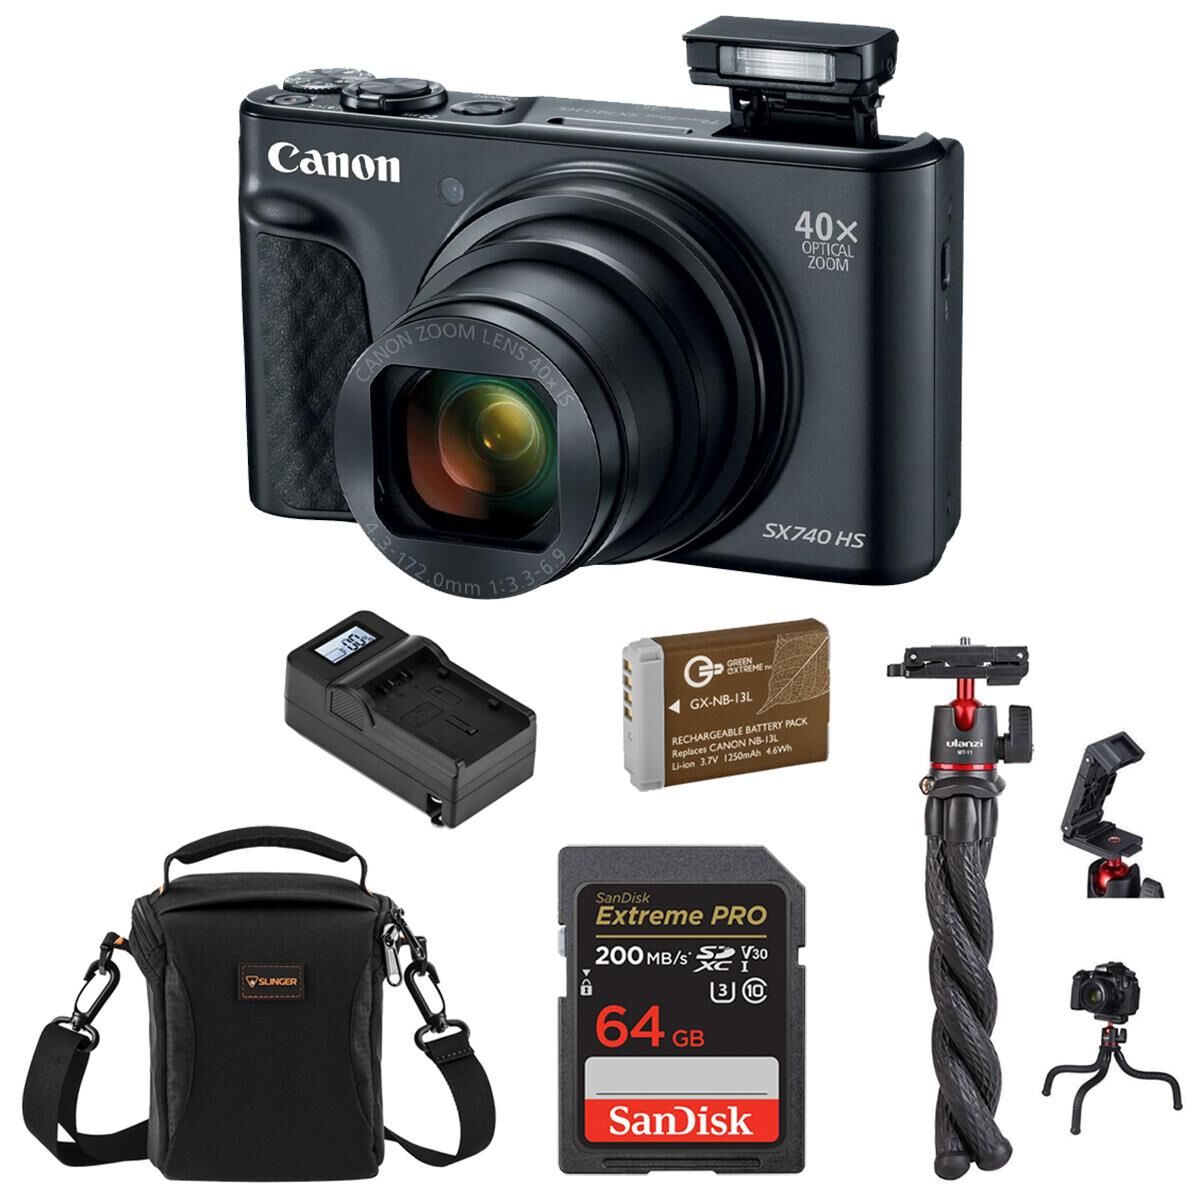 Canon PowerShot SX740 HS Camera, Black with Accessories Kit